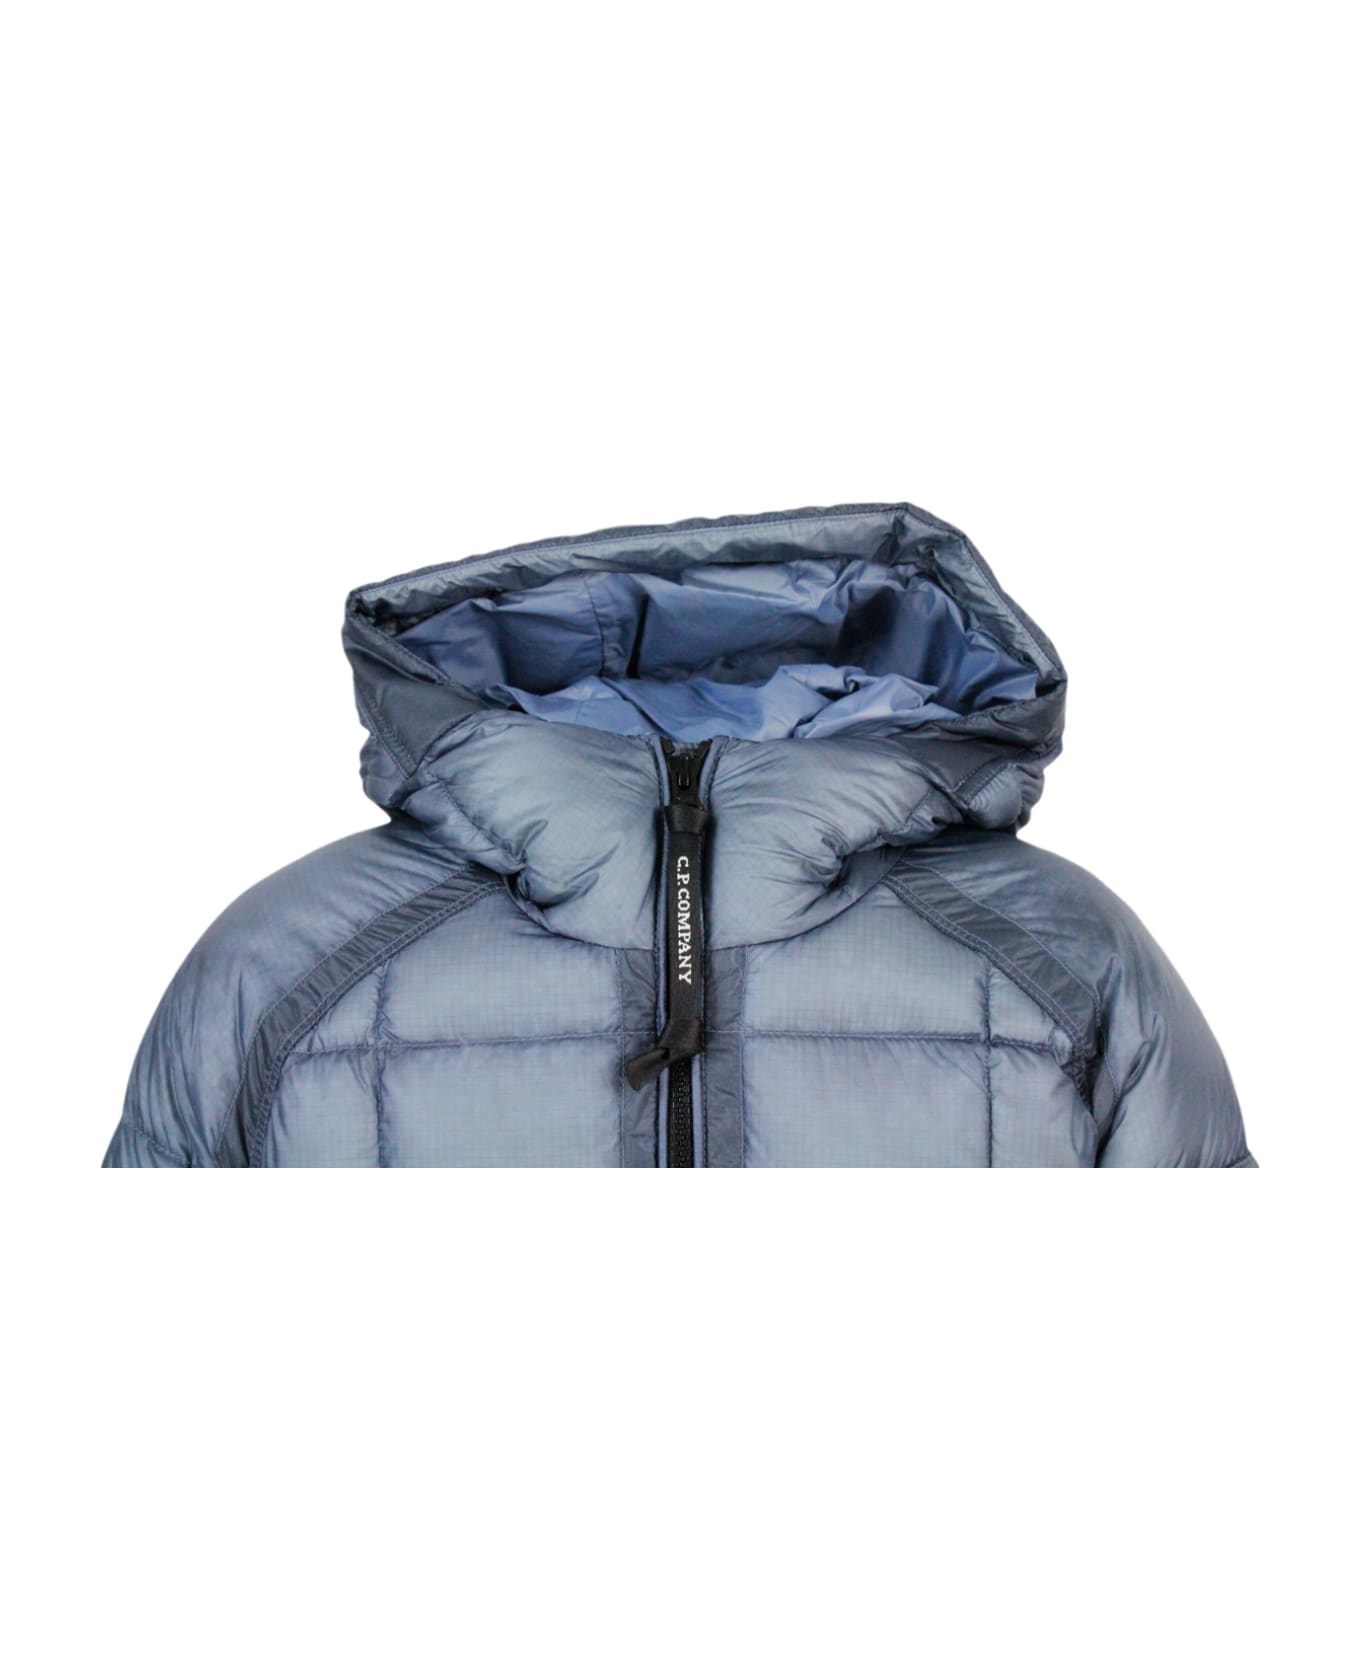 C.P. Company Dd Shell Down Jacket In Real Goose Down In Ultralight Fabric With Checkered Texture. - Blu